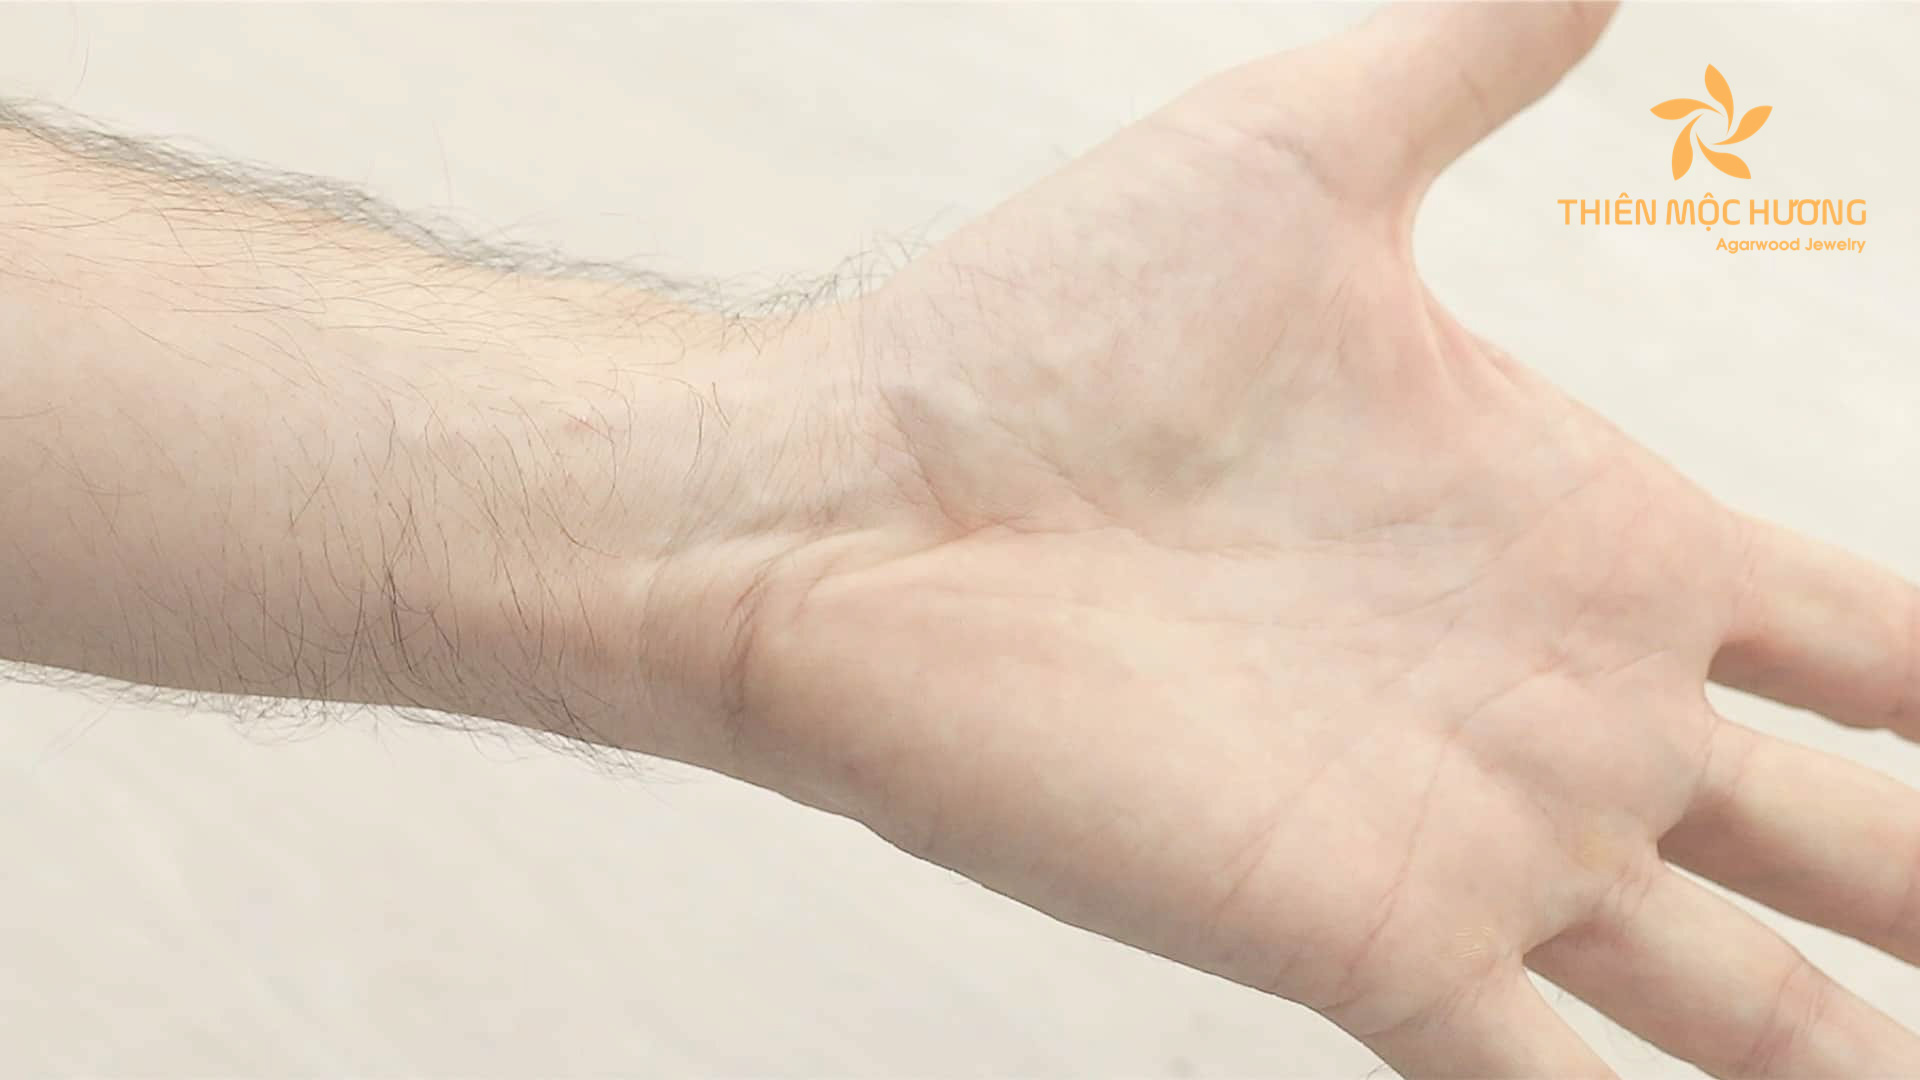 Rotate your forearm outward until your palm is facing upward